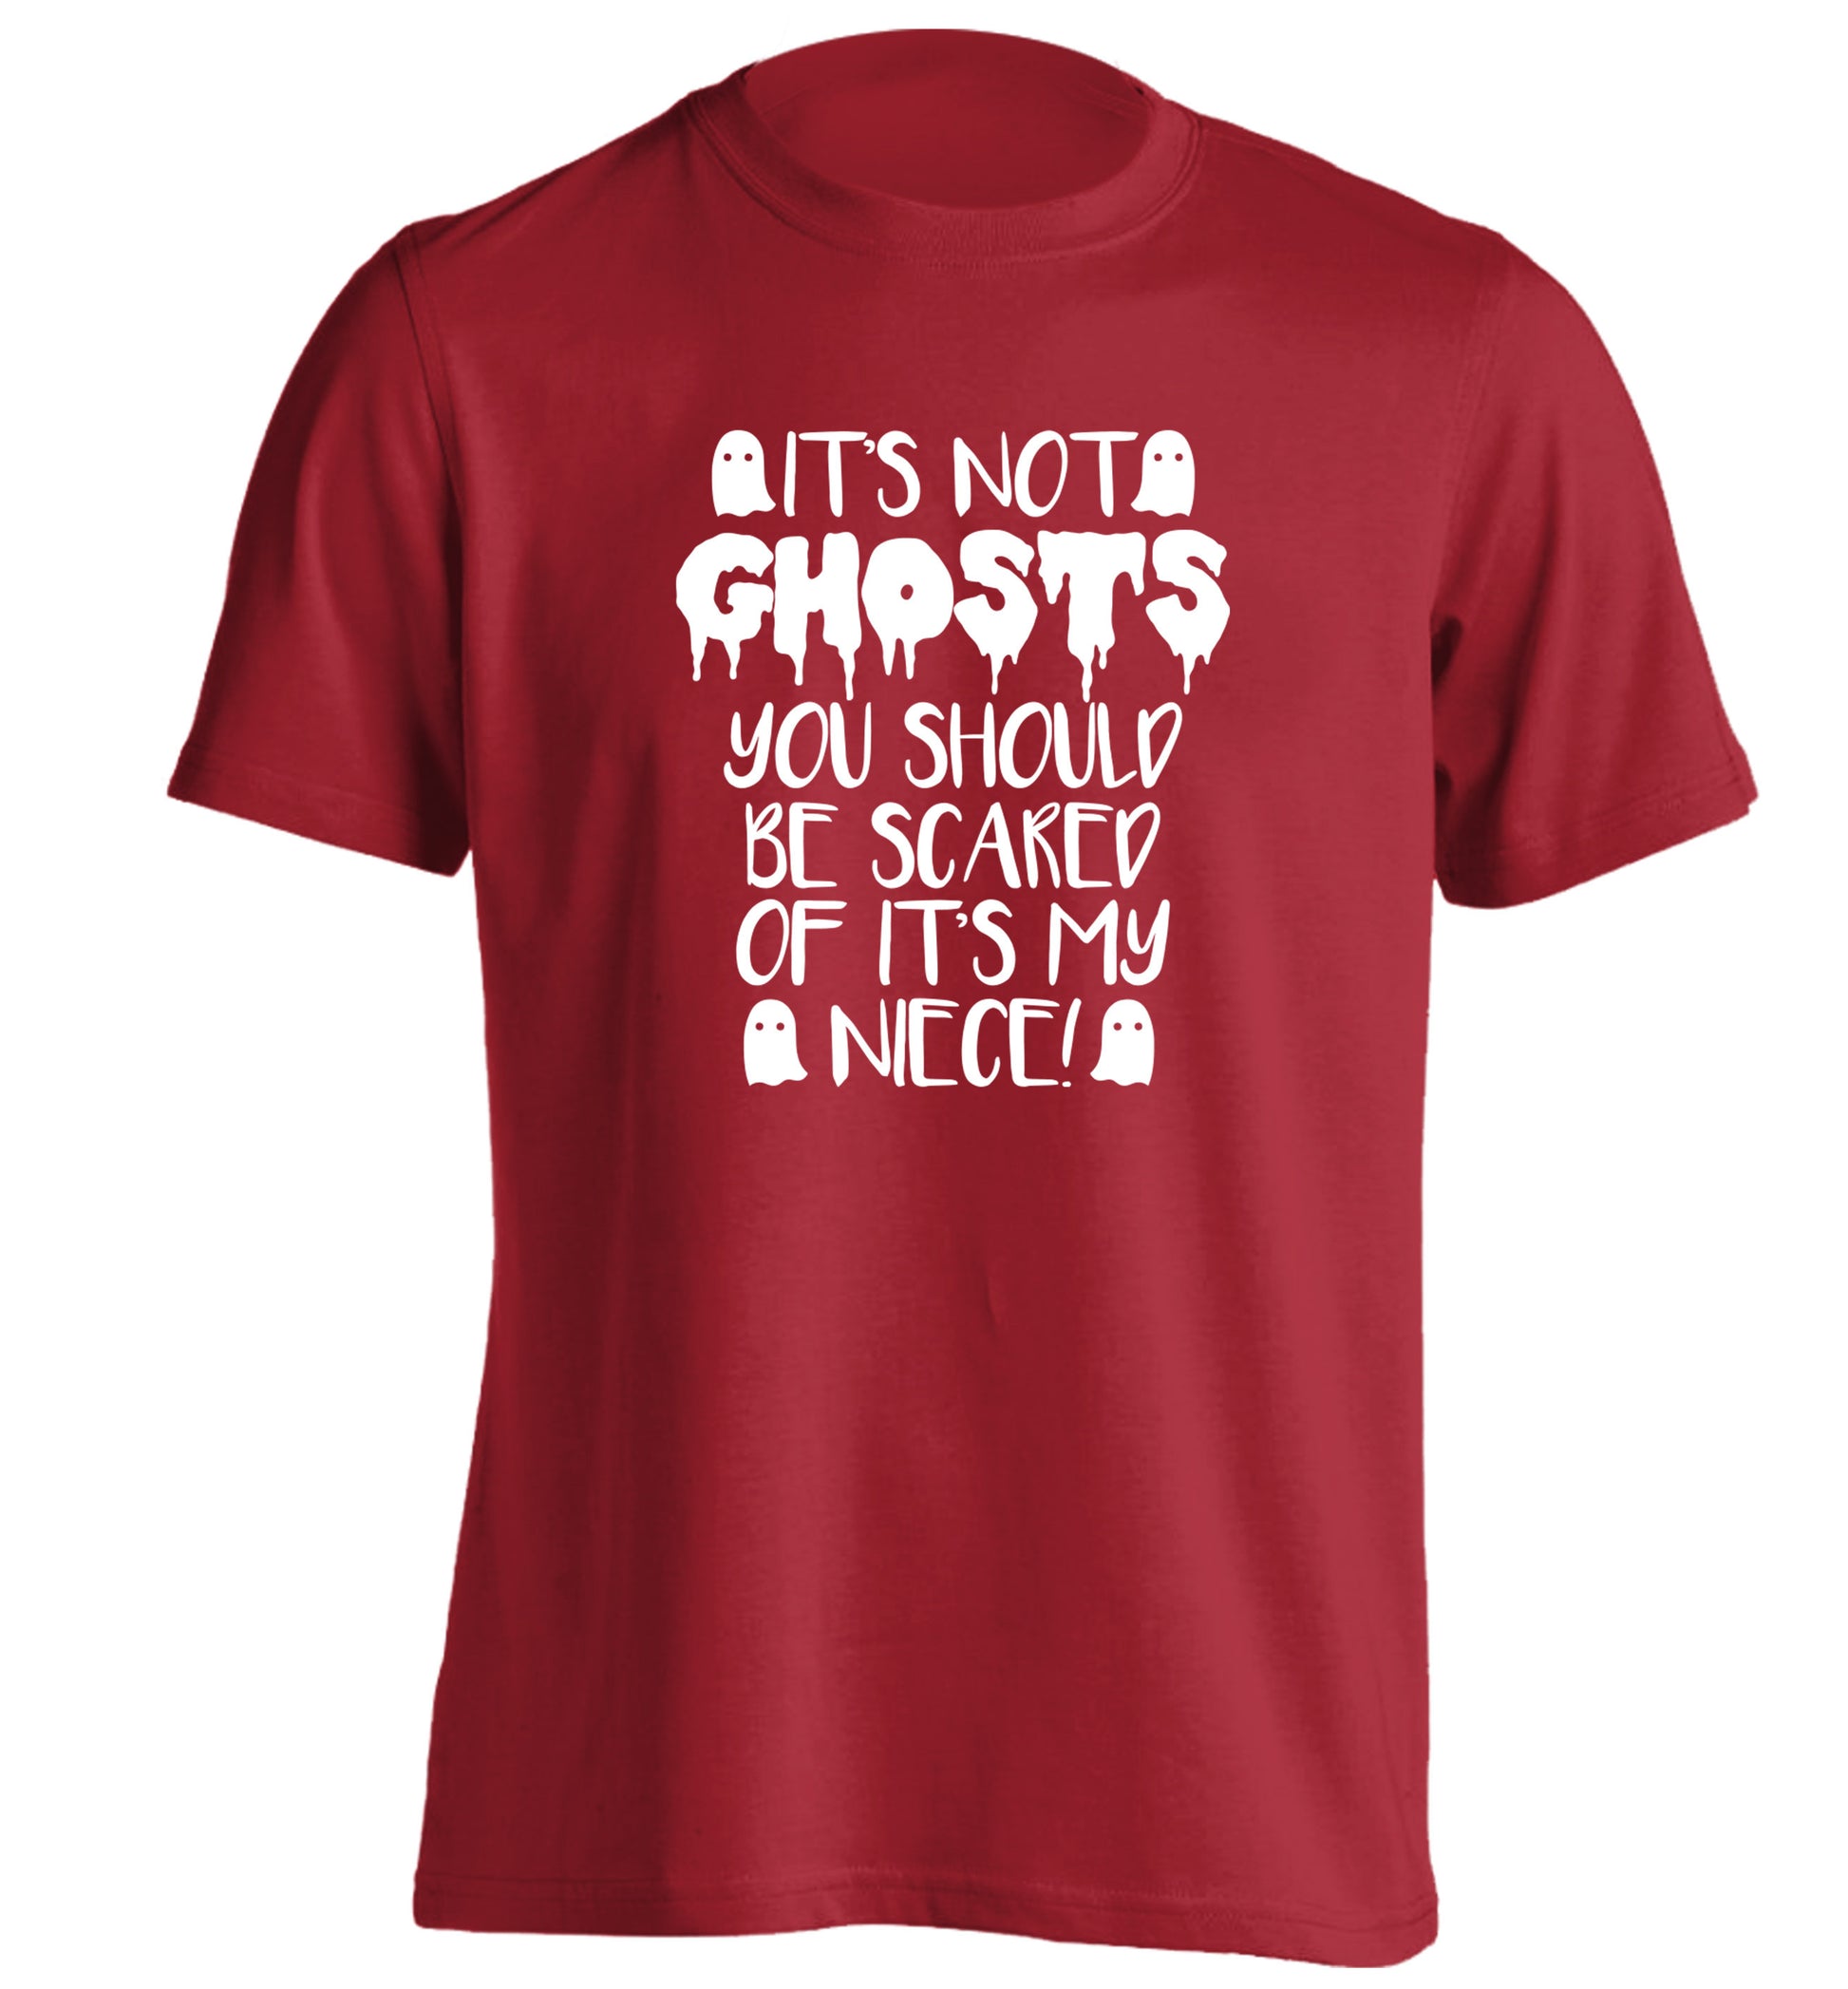 It's not ghosts you should be scared of it's my niece! adults unisex red Tshirt 2XL